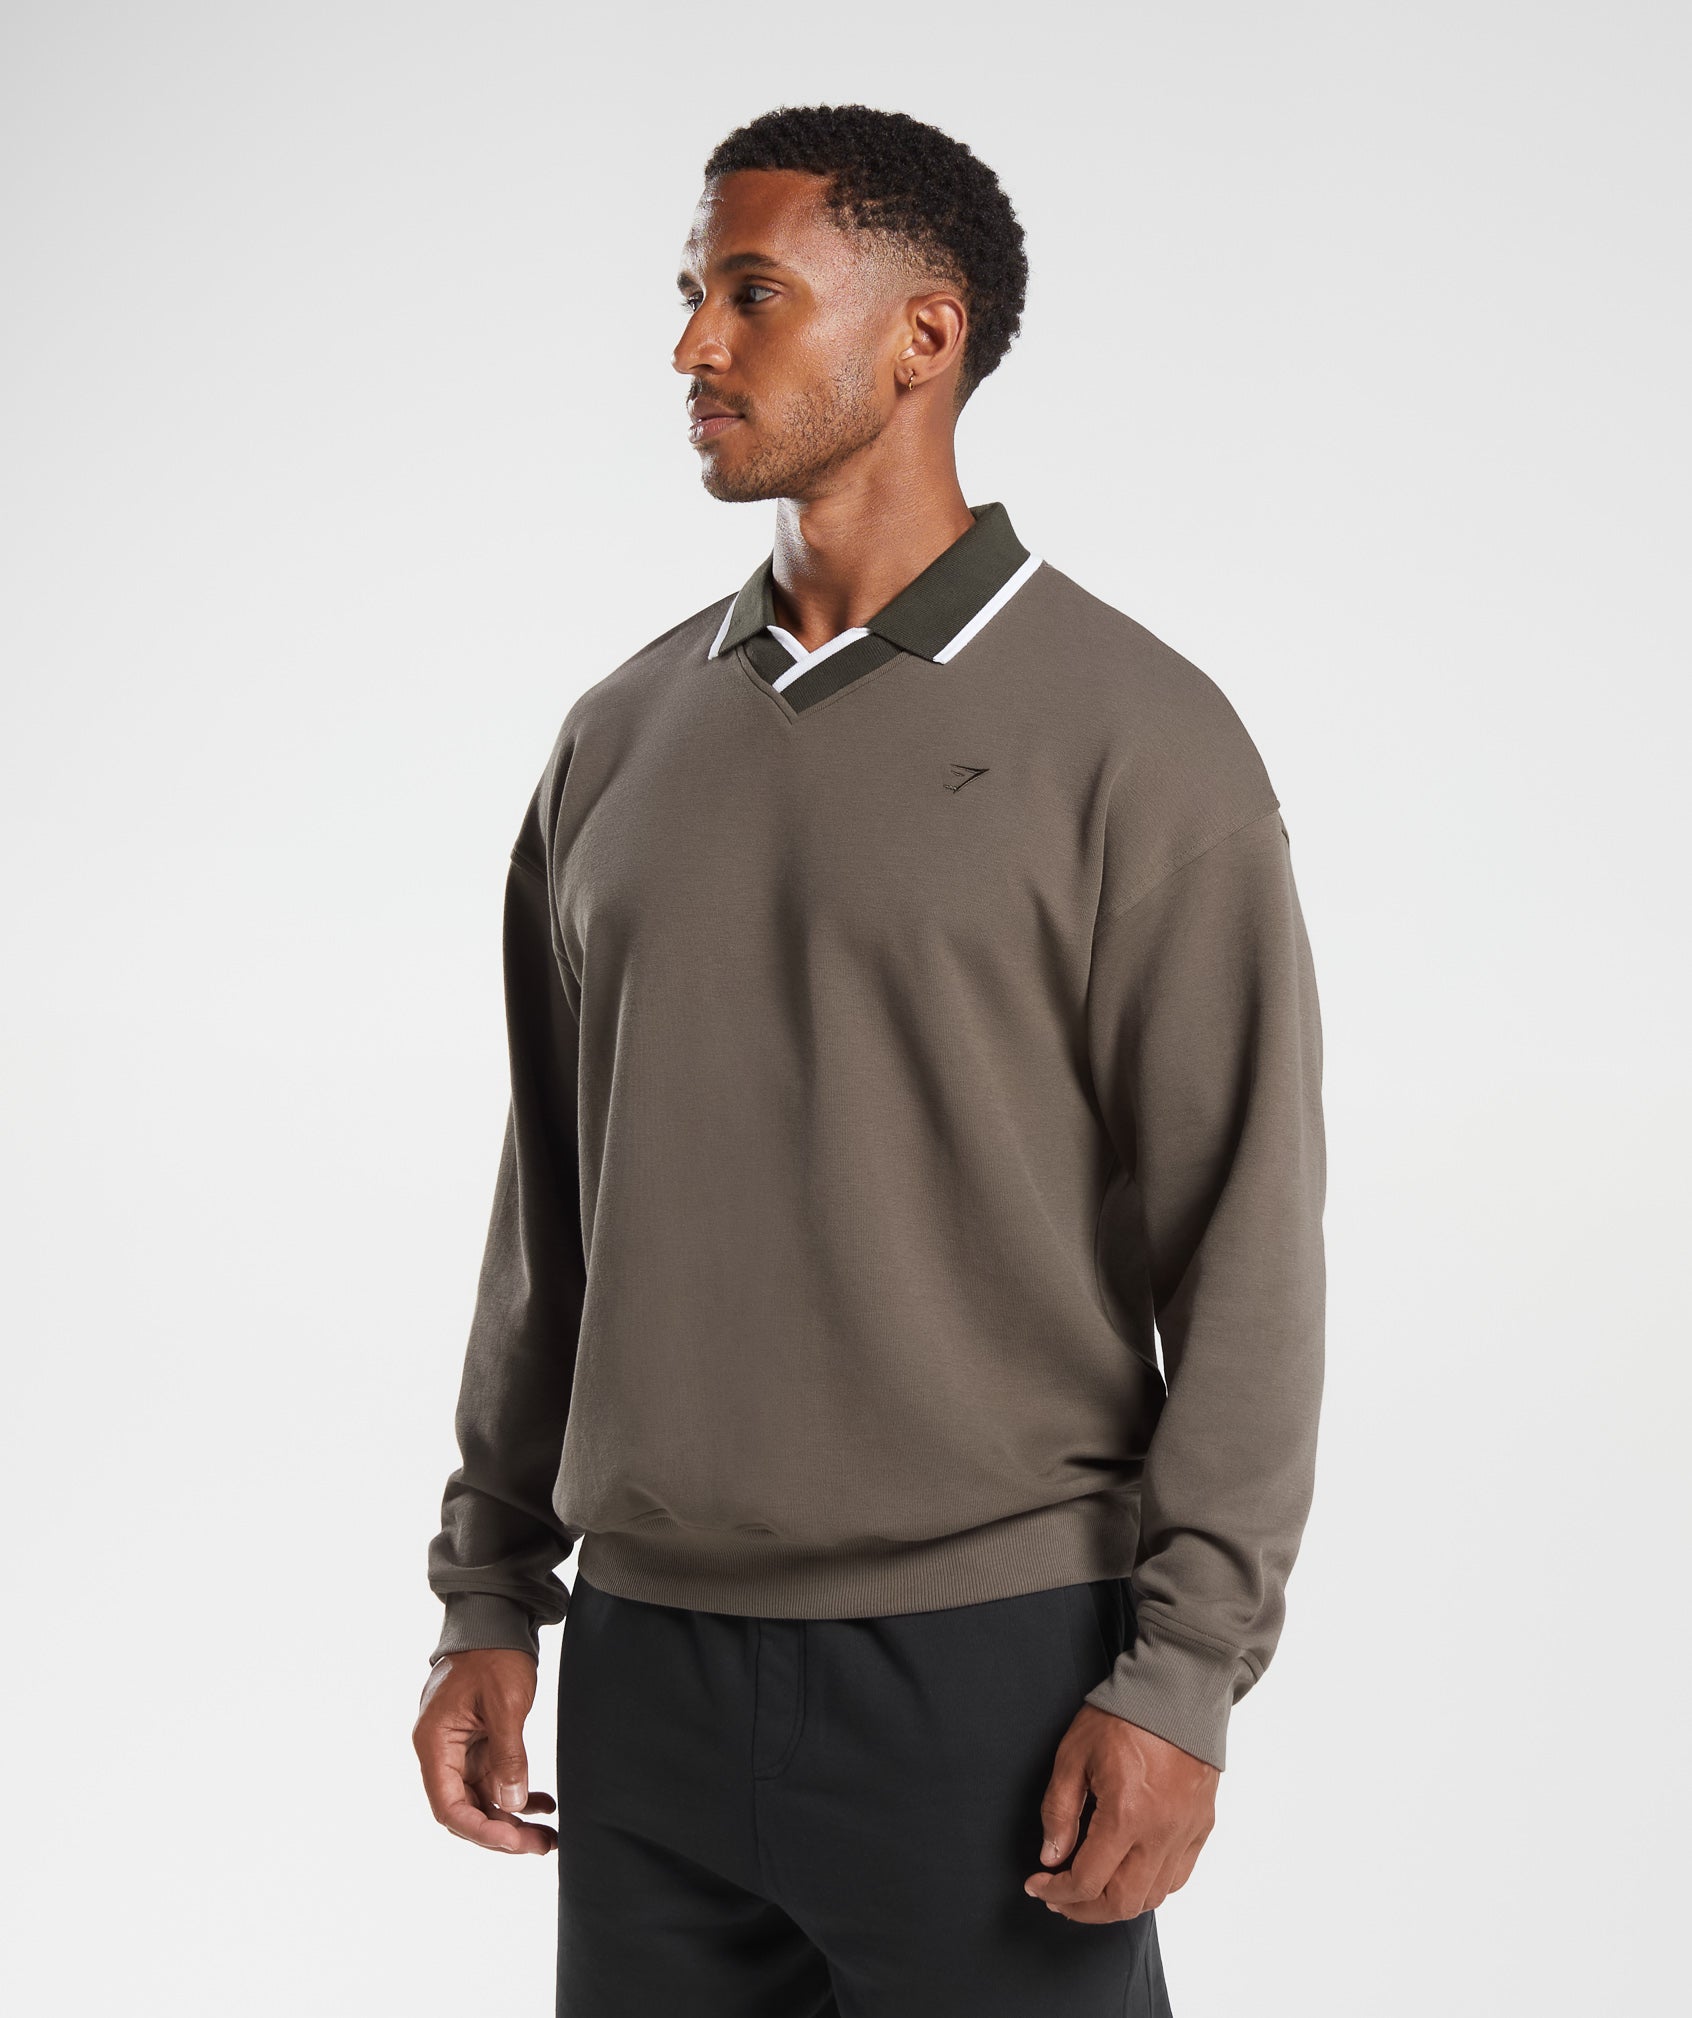 Rest Day Street Polo Pullover in Camo Brown - view 3